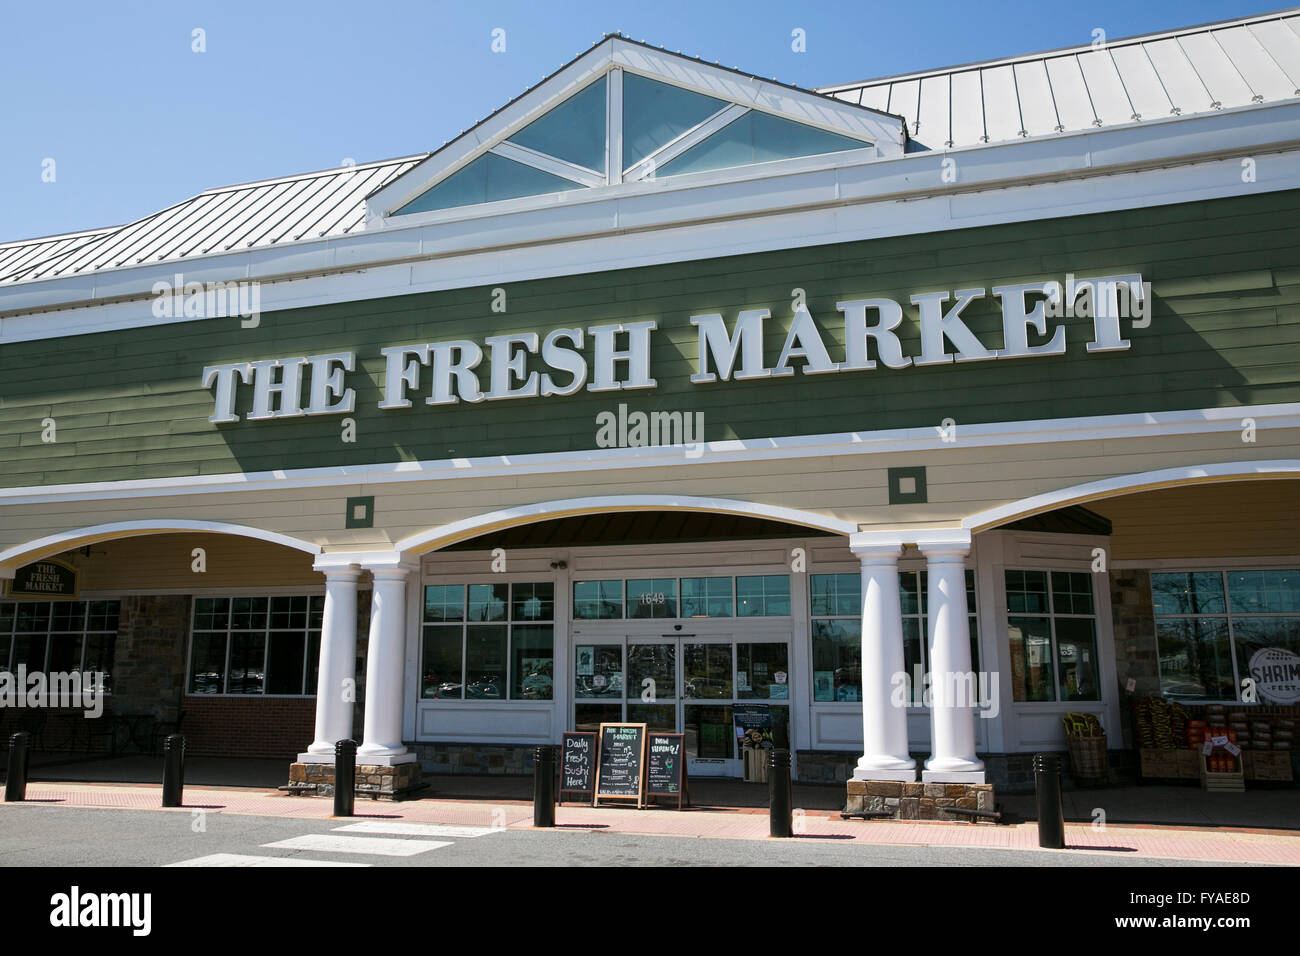 A logo sign outside of a The Fresh Market grocery store location in Rockville, Maryland on April 10, 2016. Stock Photo